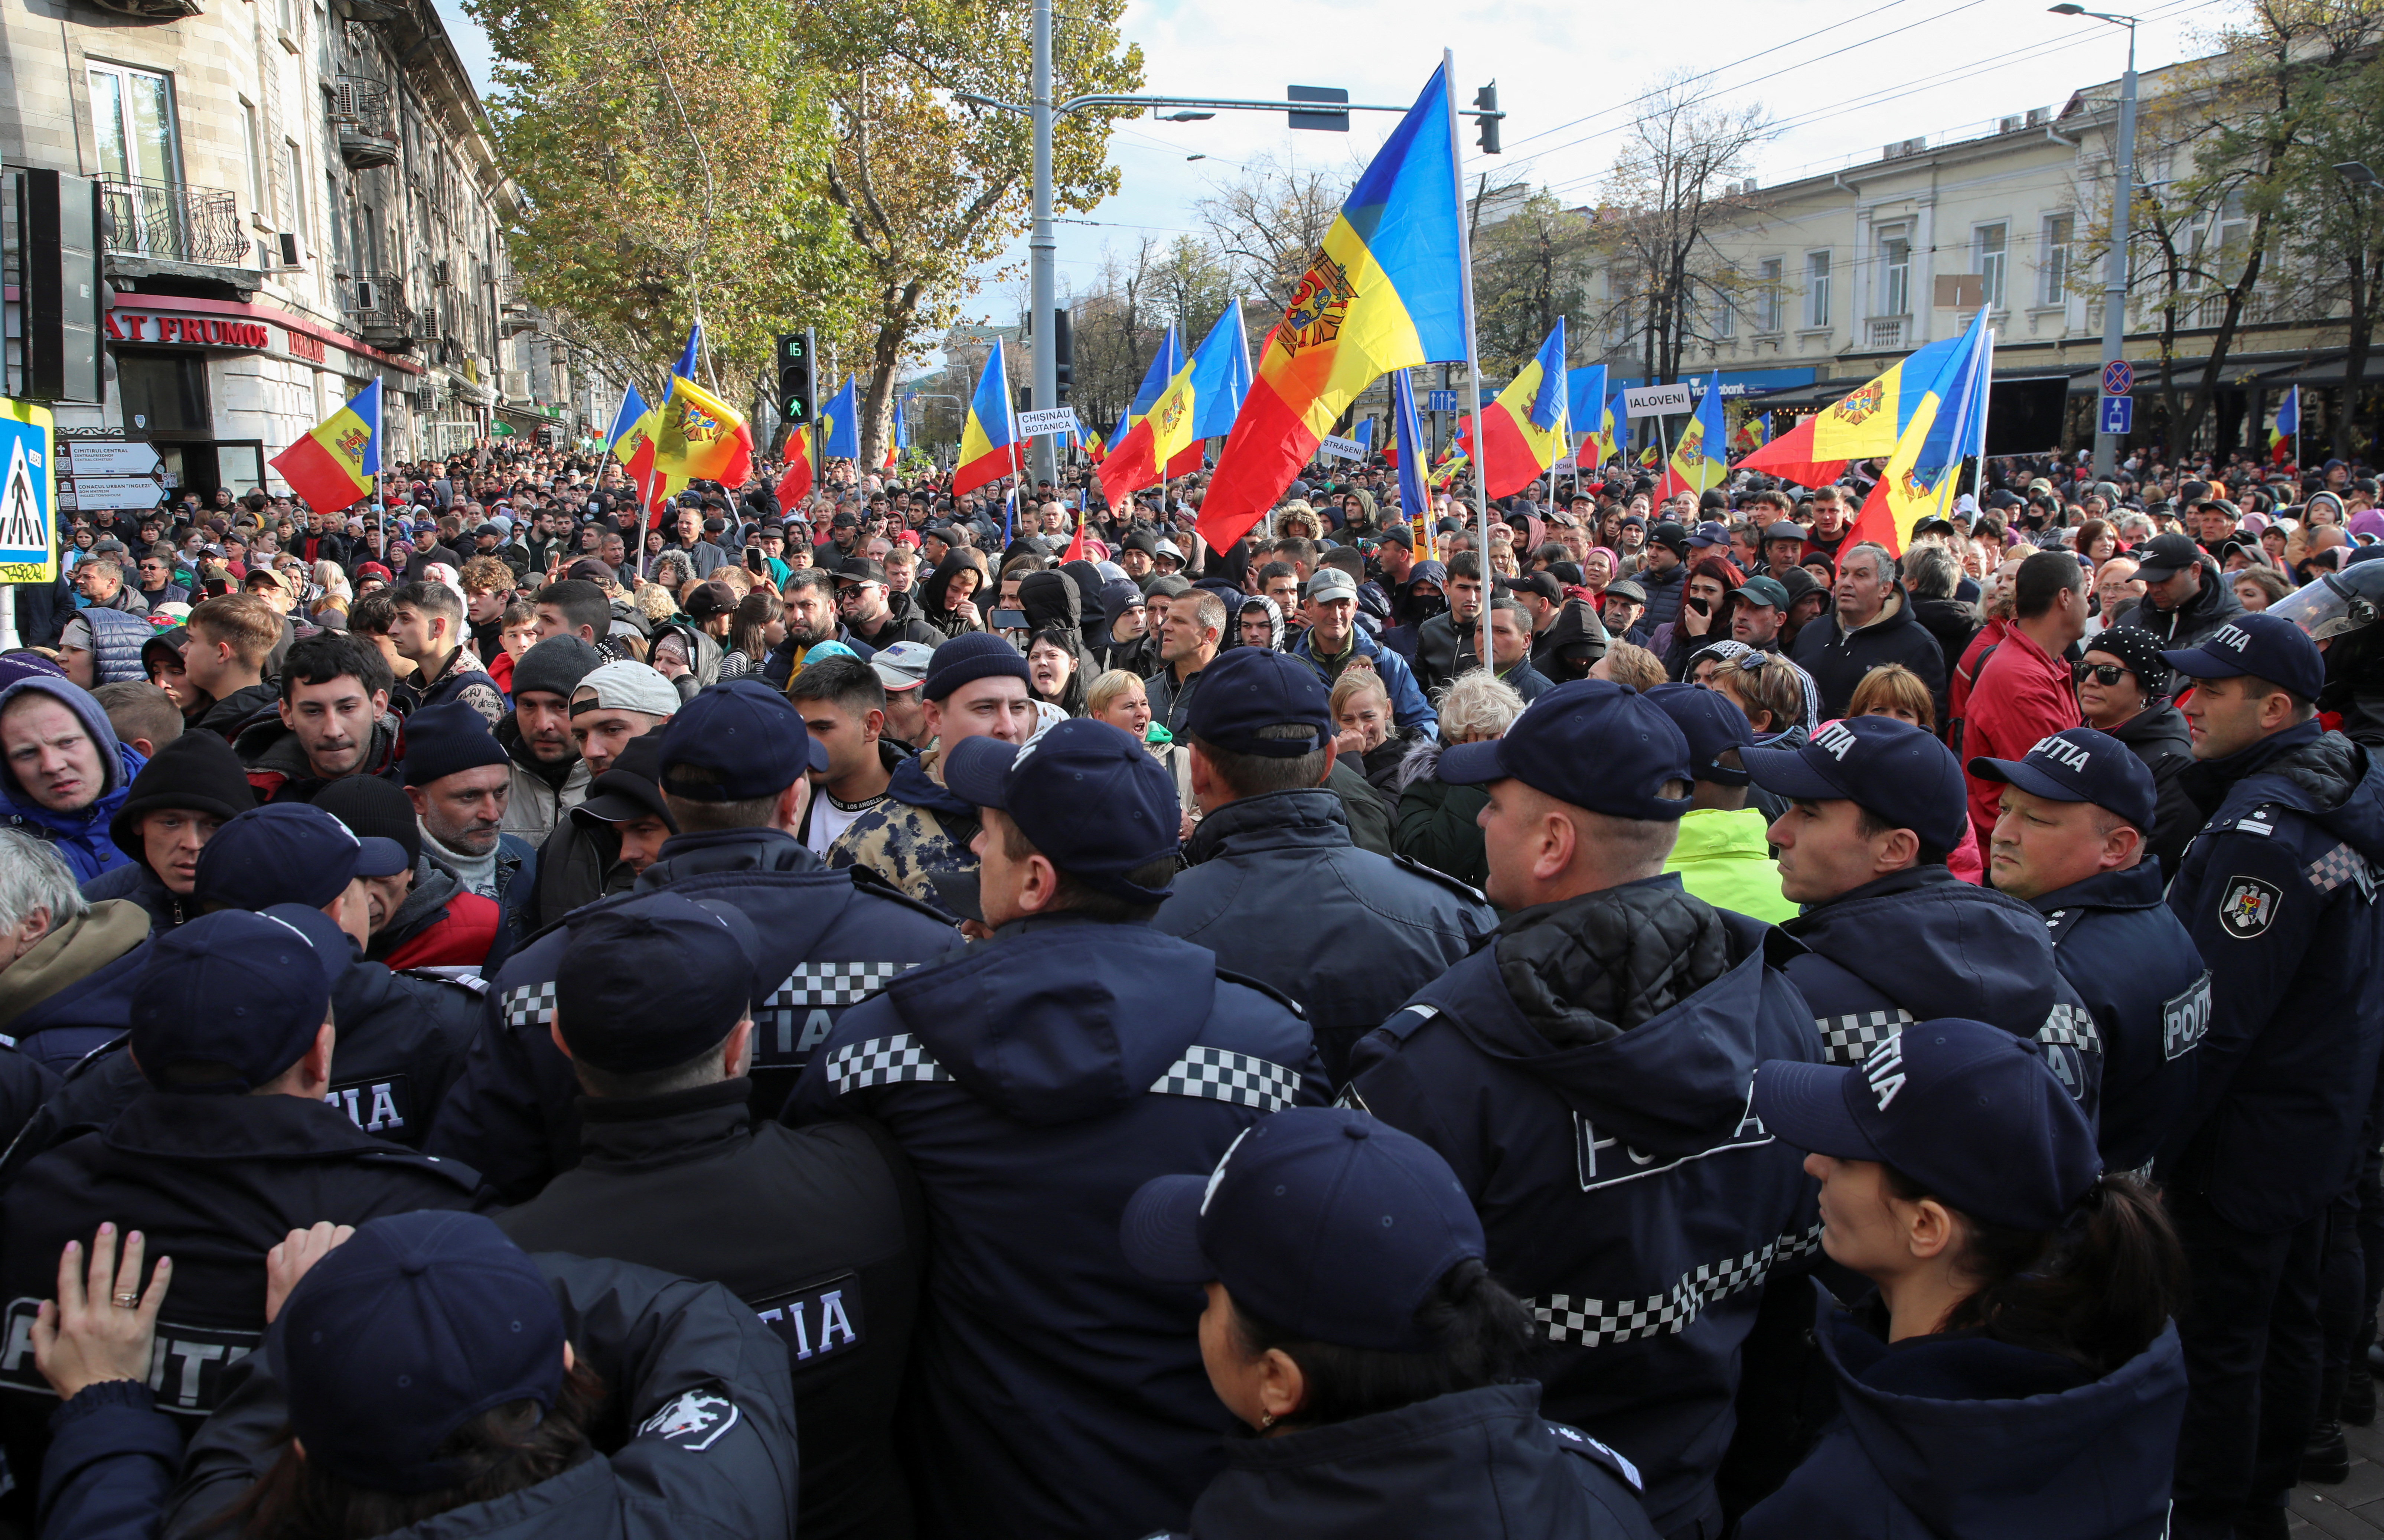 Police officers block a street during an anti-government protest in Chisinau